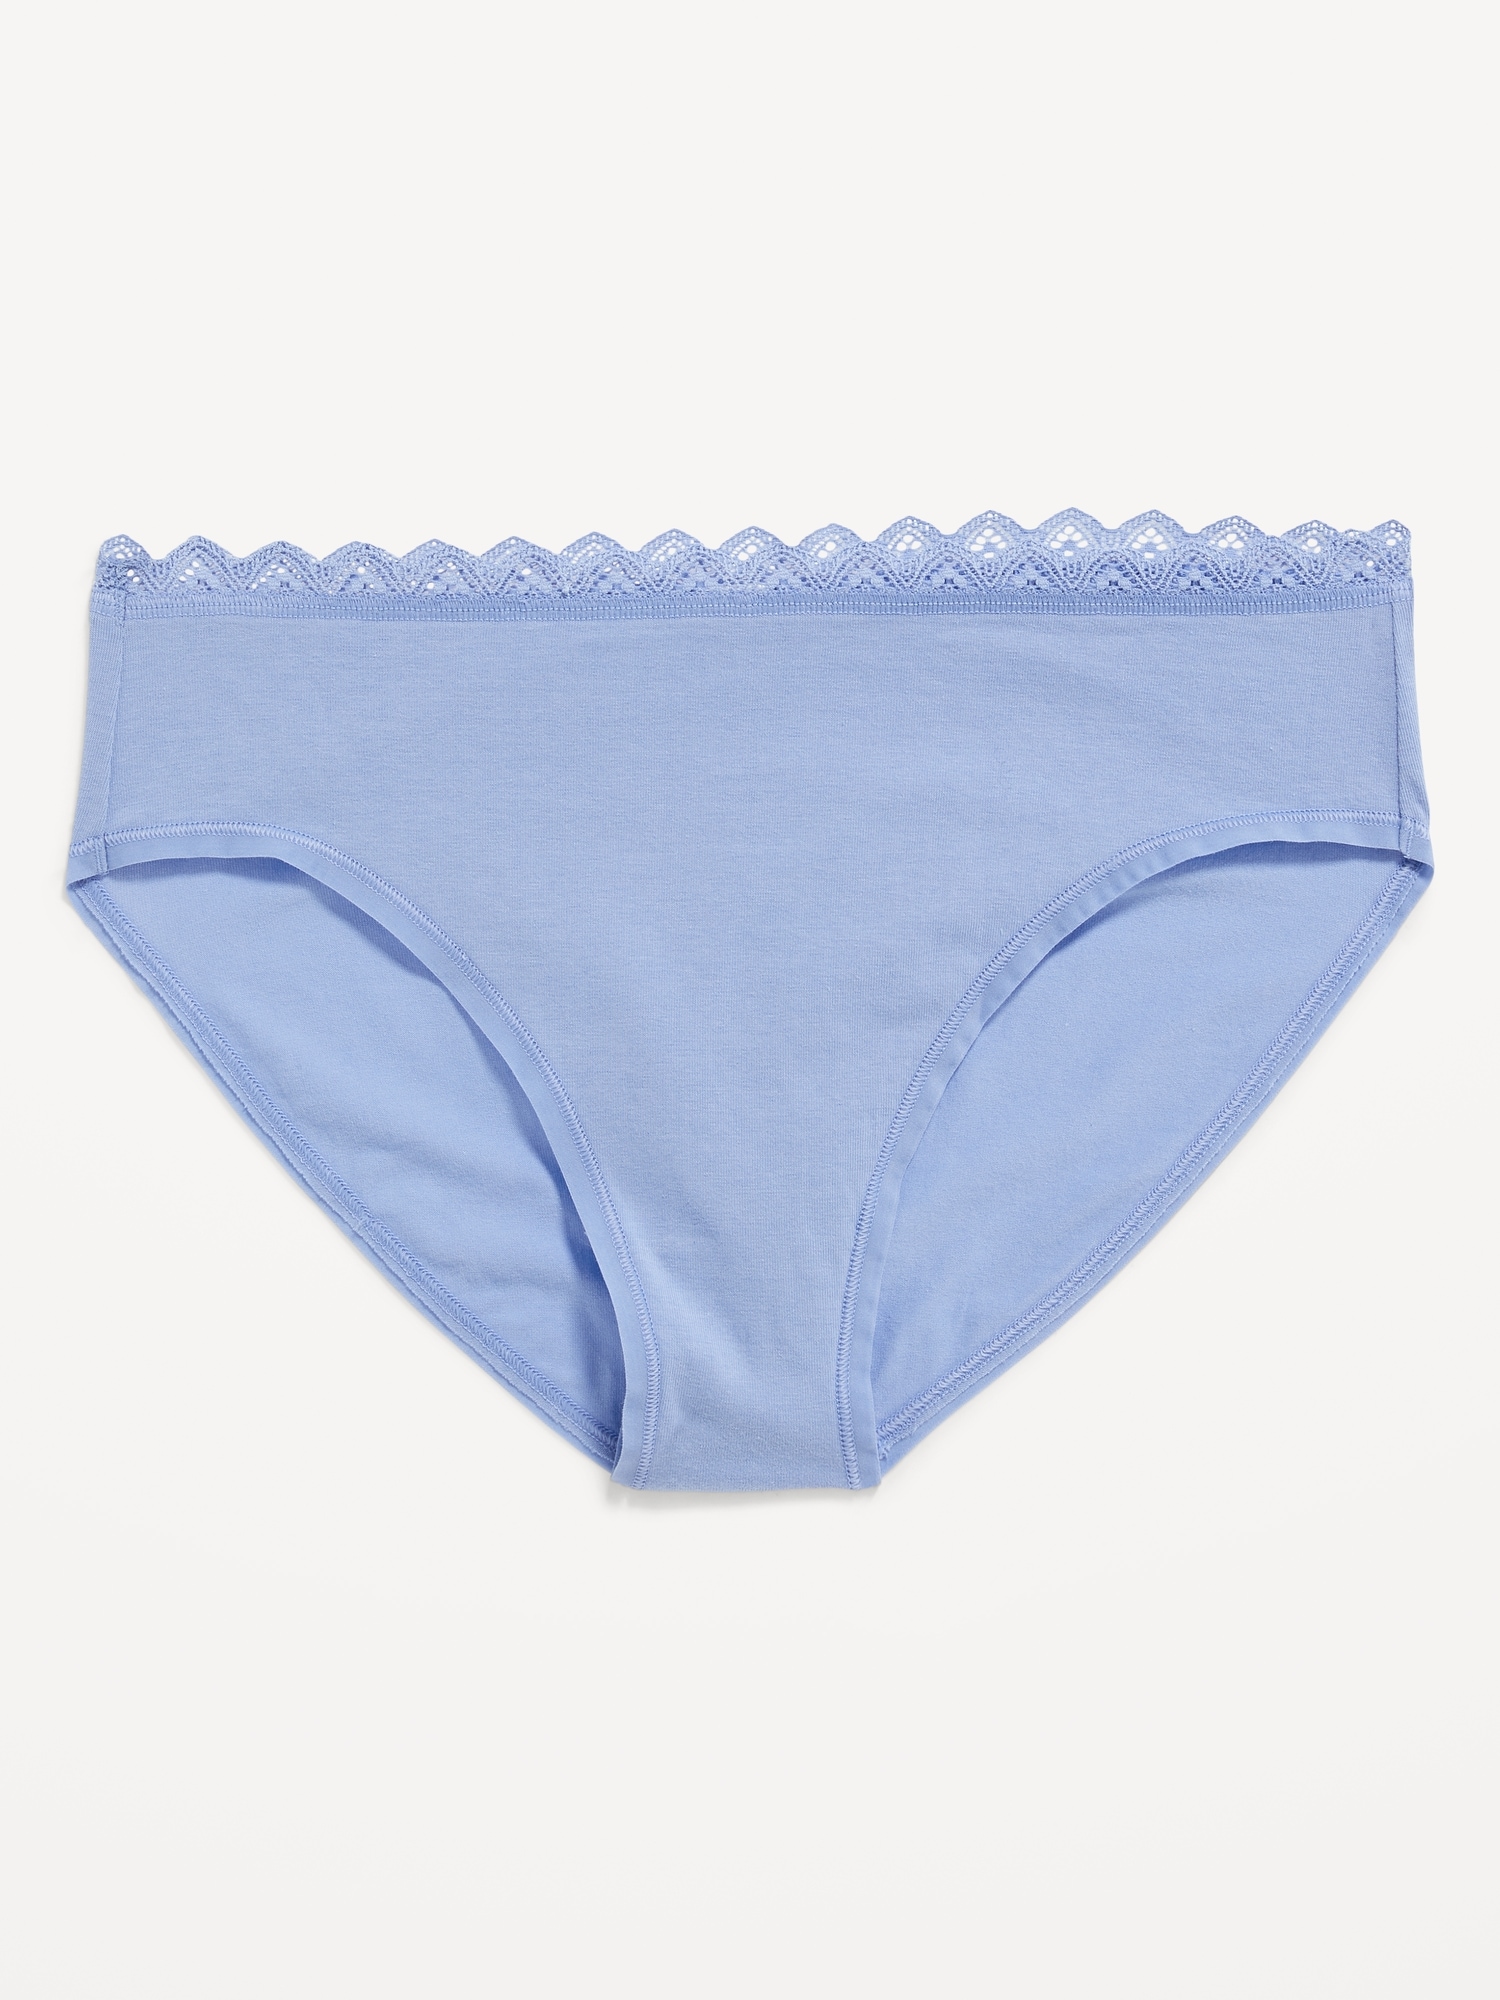 Old Navy High-Waisted Lace-Trimmed Bikini Underwear for Women blue. 1